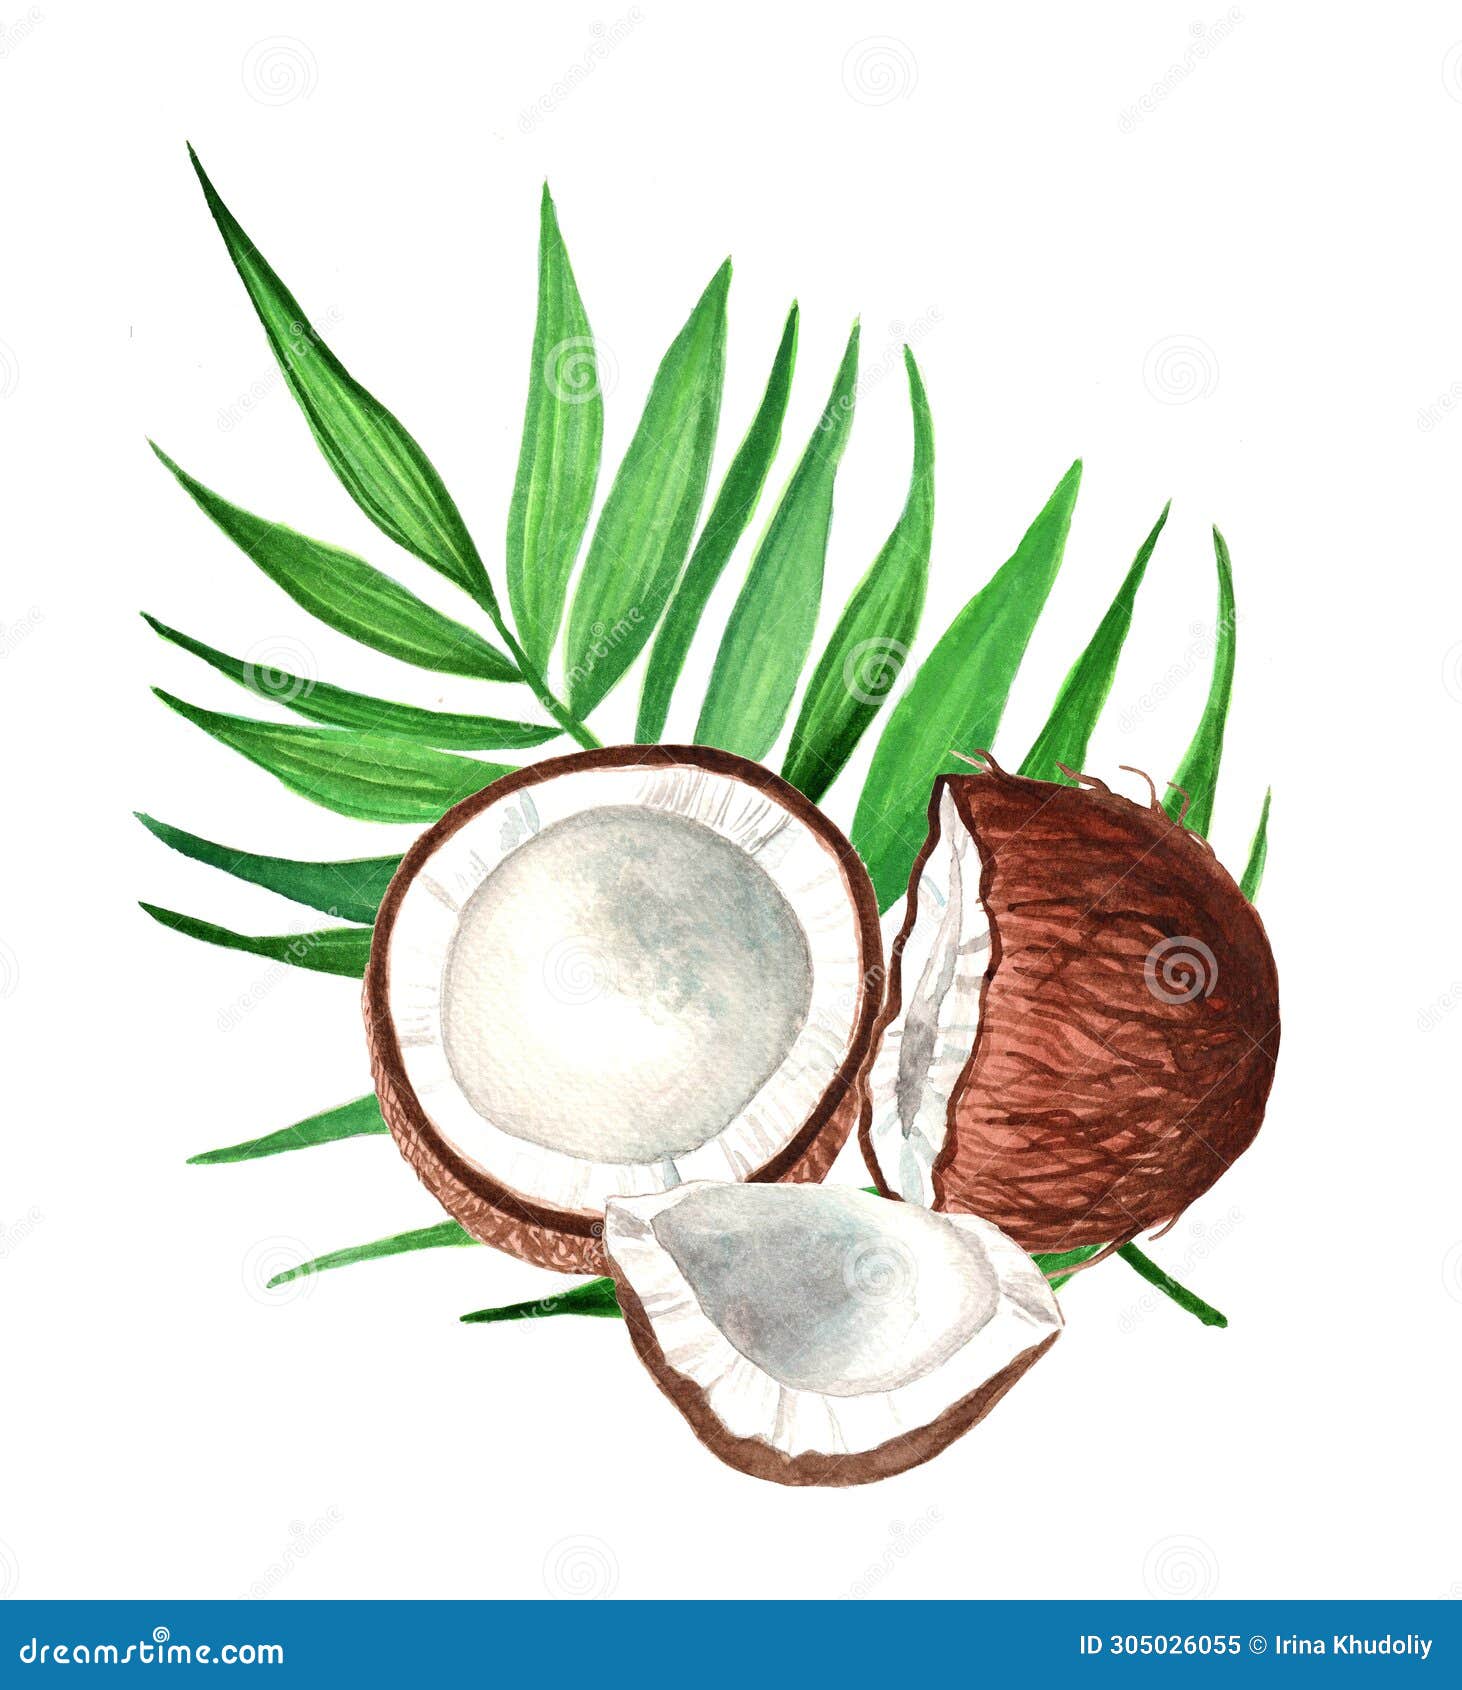 Watercolor Cut Coconut with Green Leaf, Isolated Hand Drawn ...